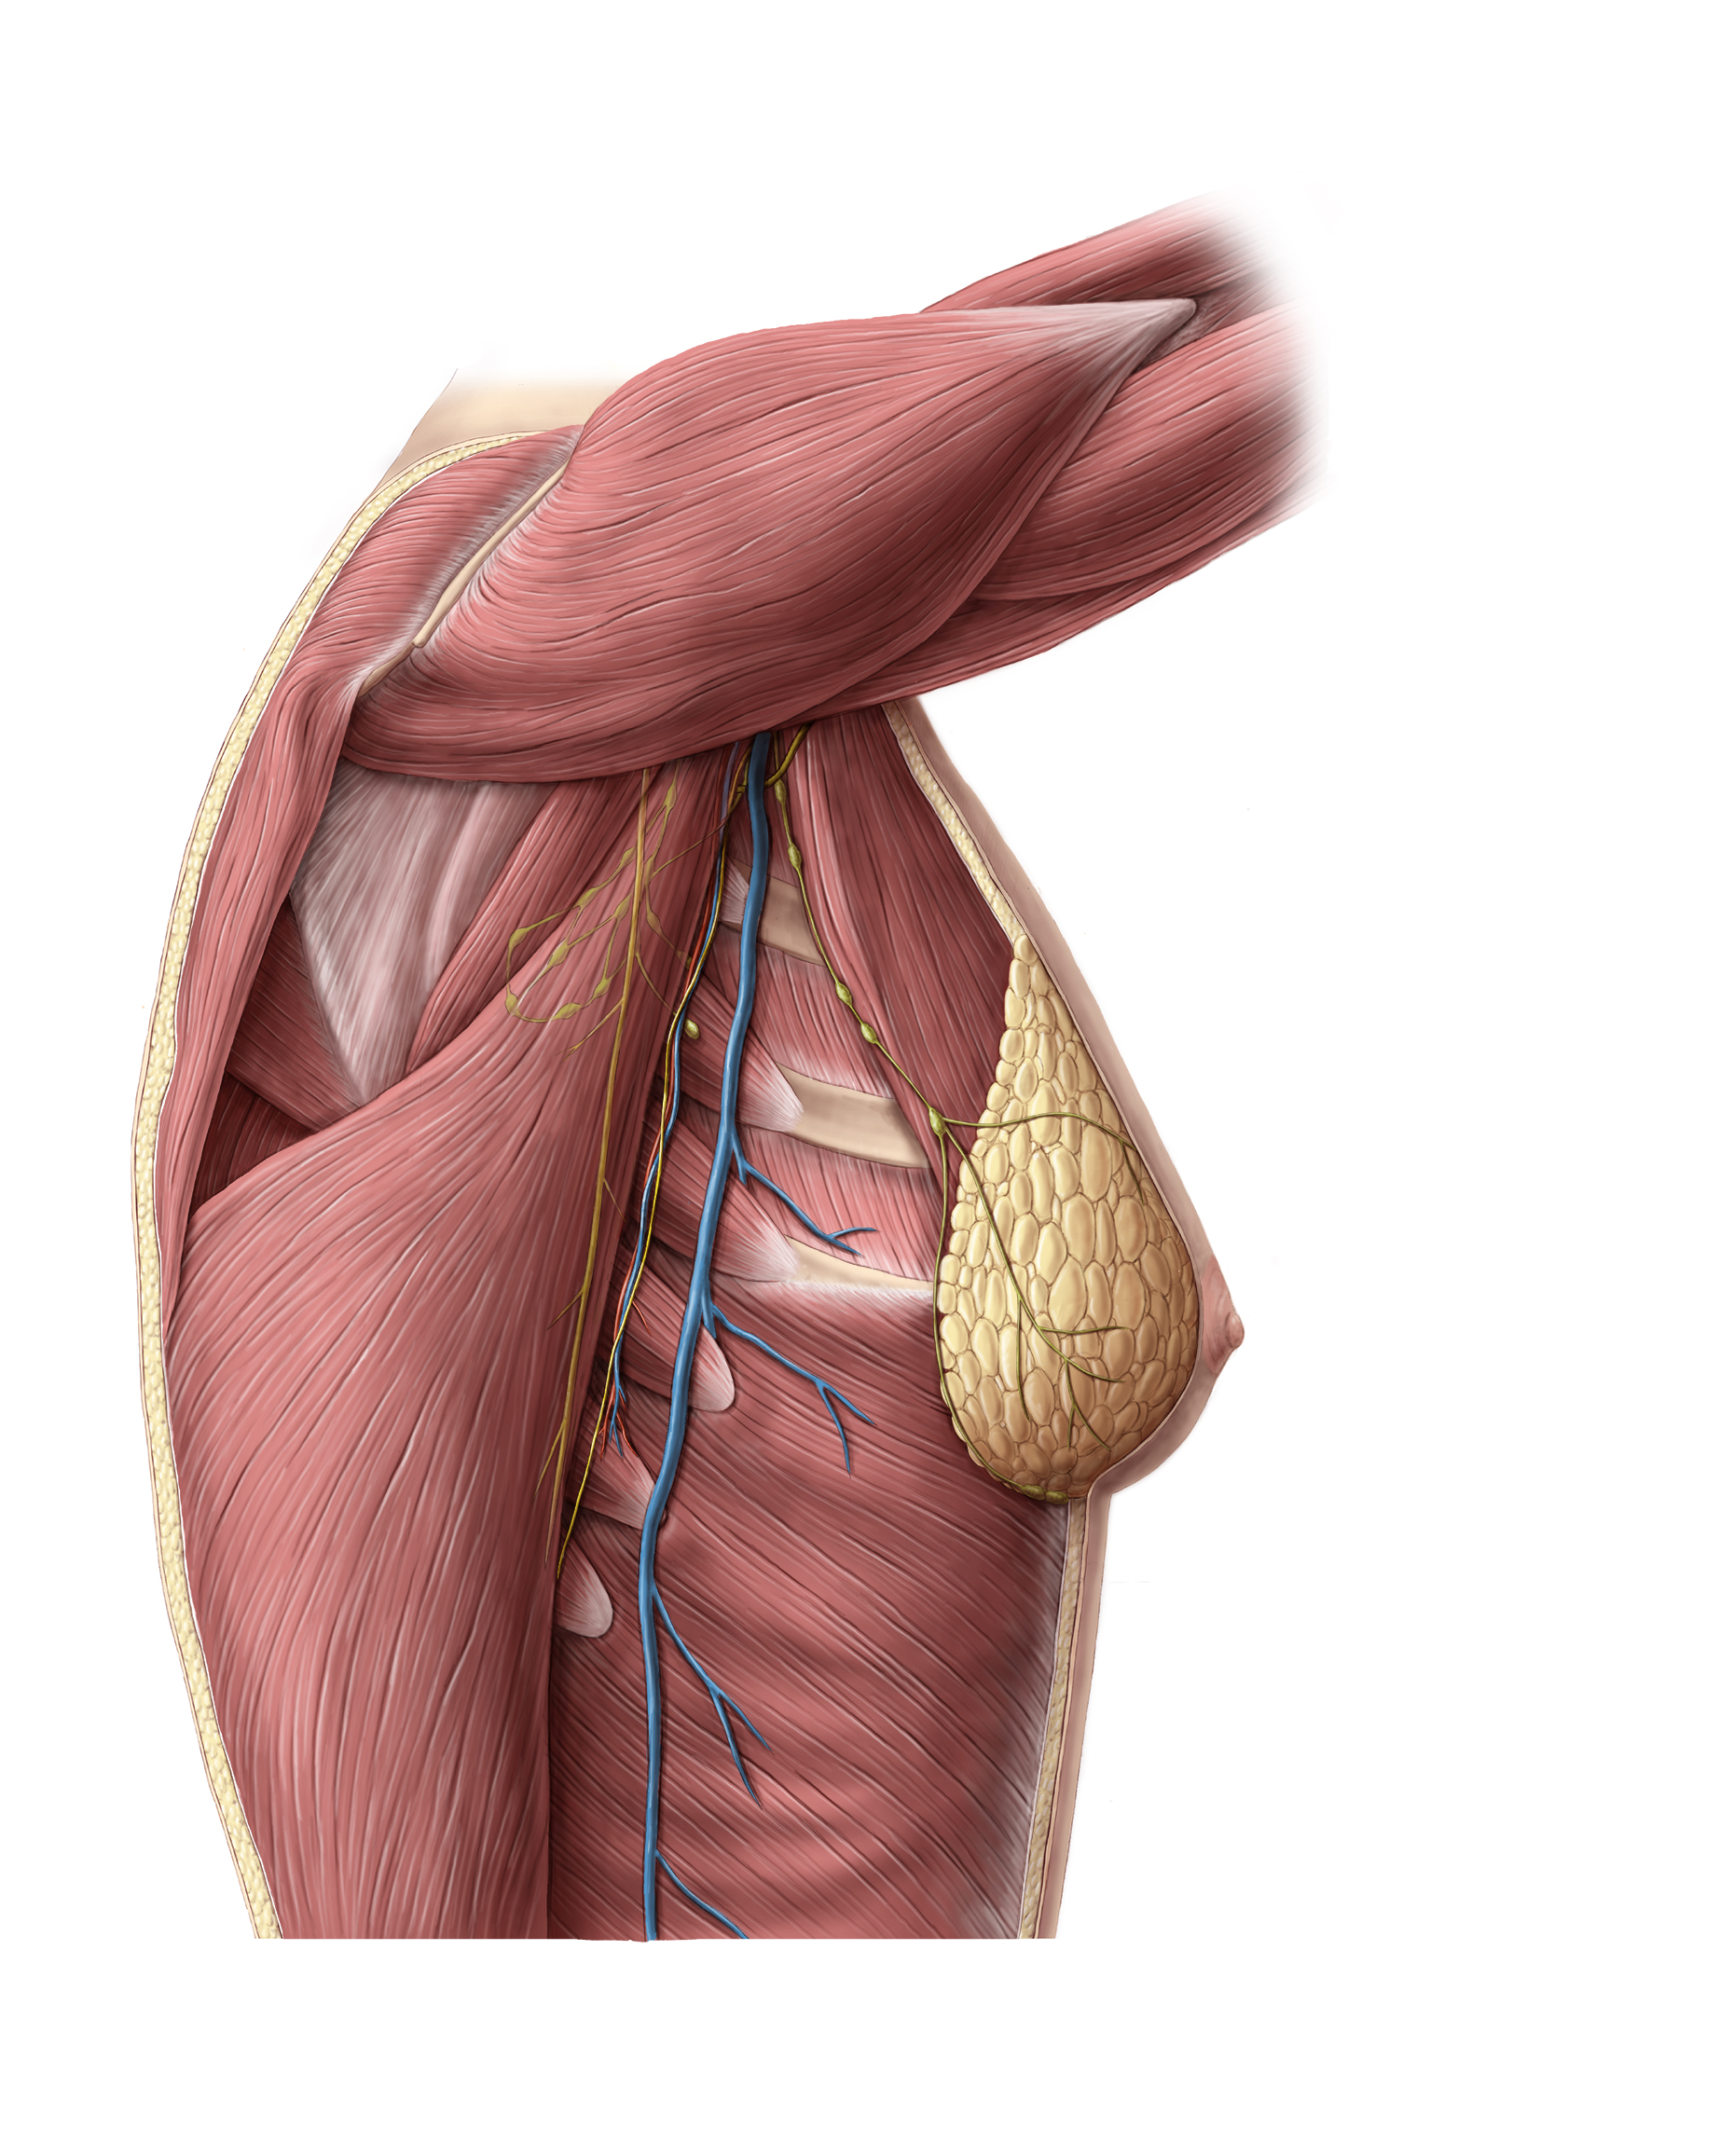 Lateral view of thorax with muscles